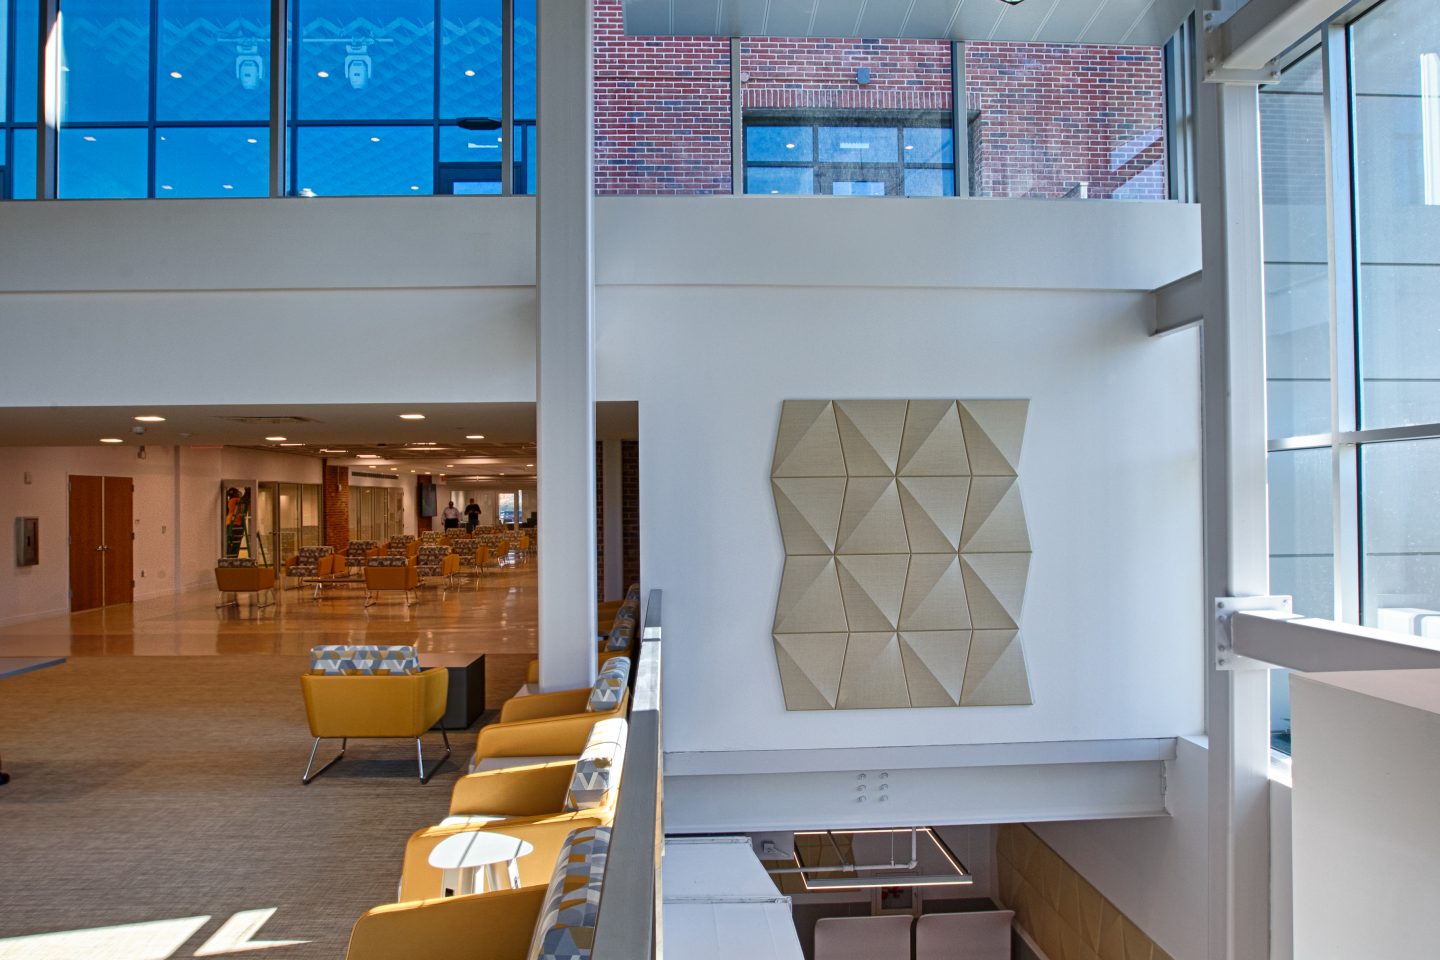 Acoustic panel and seating on the wall in the UC main lobby